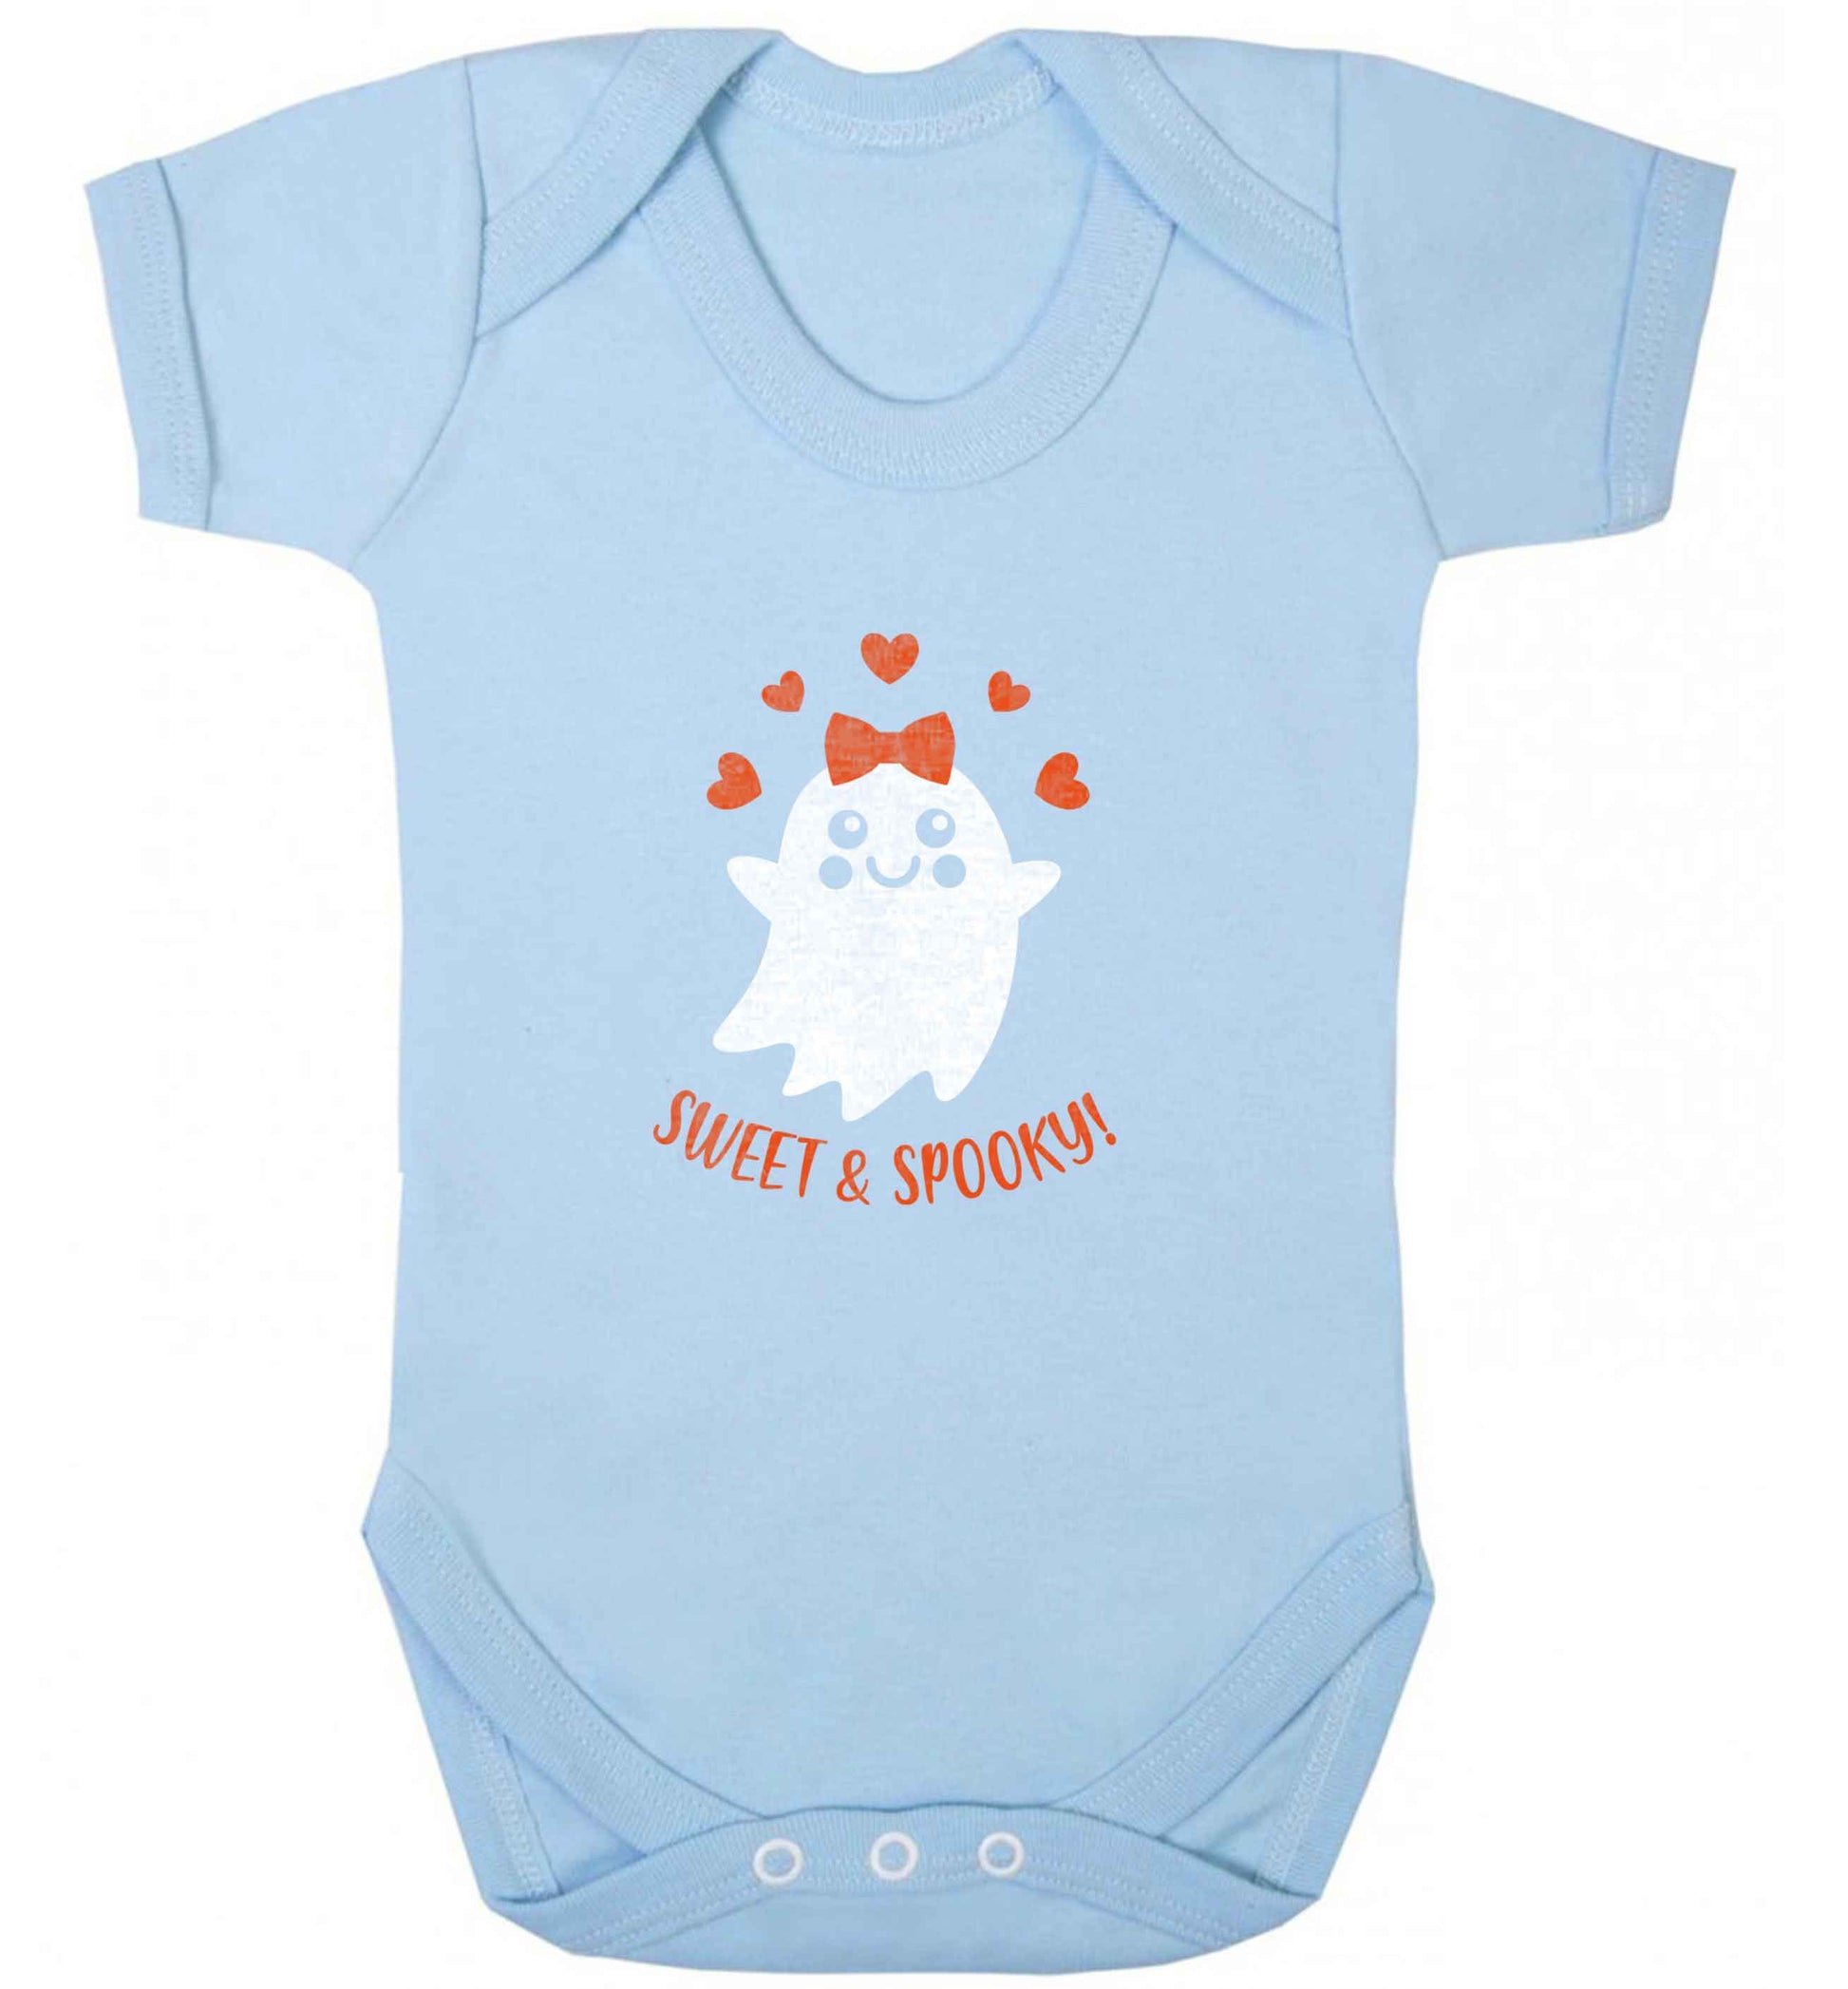 Sweet and spooky baby vest pale blue 18-24 months